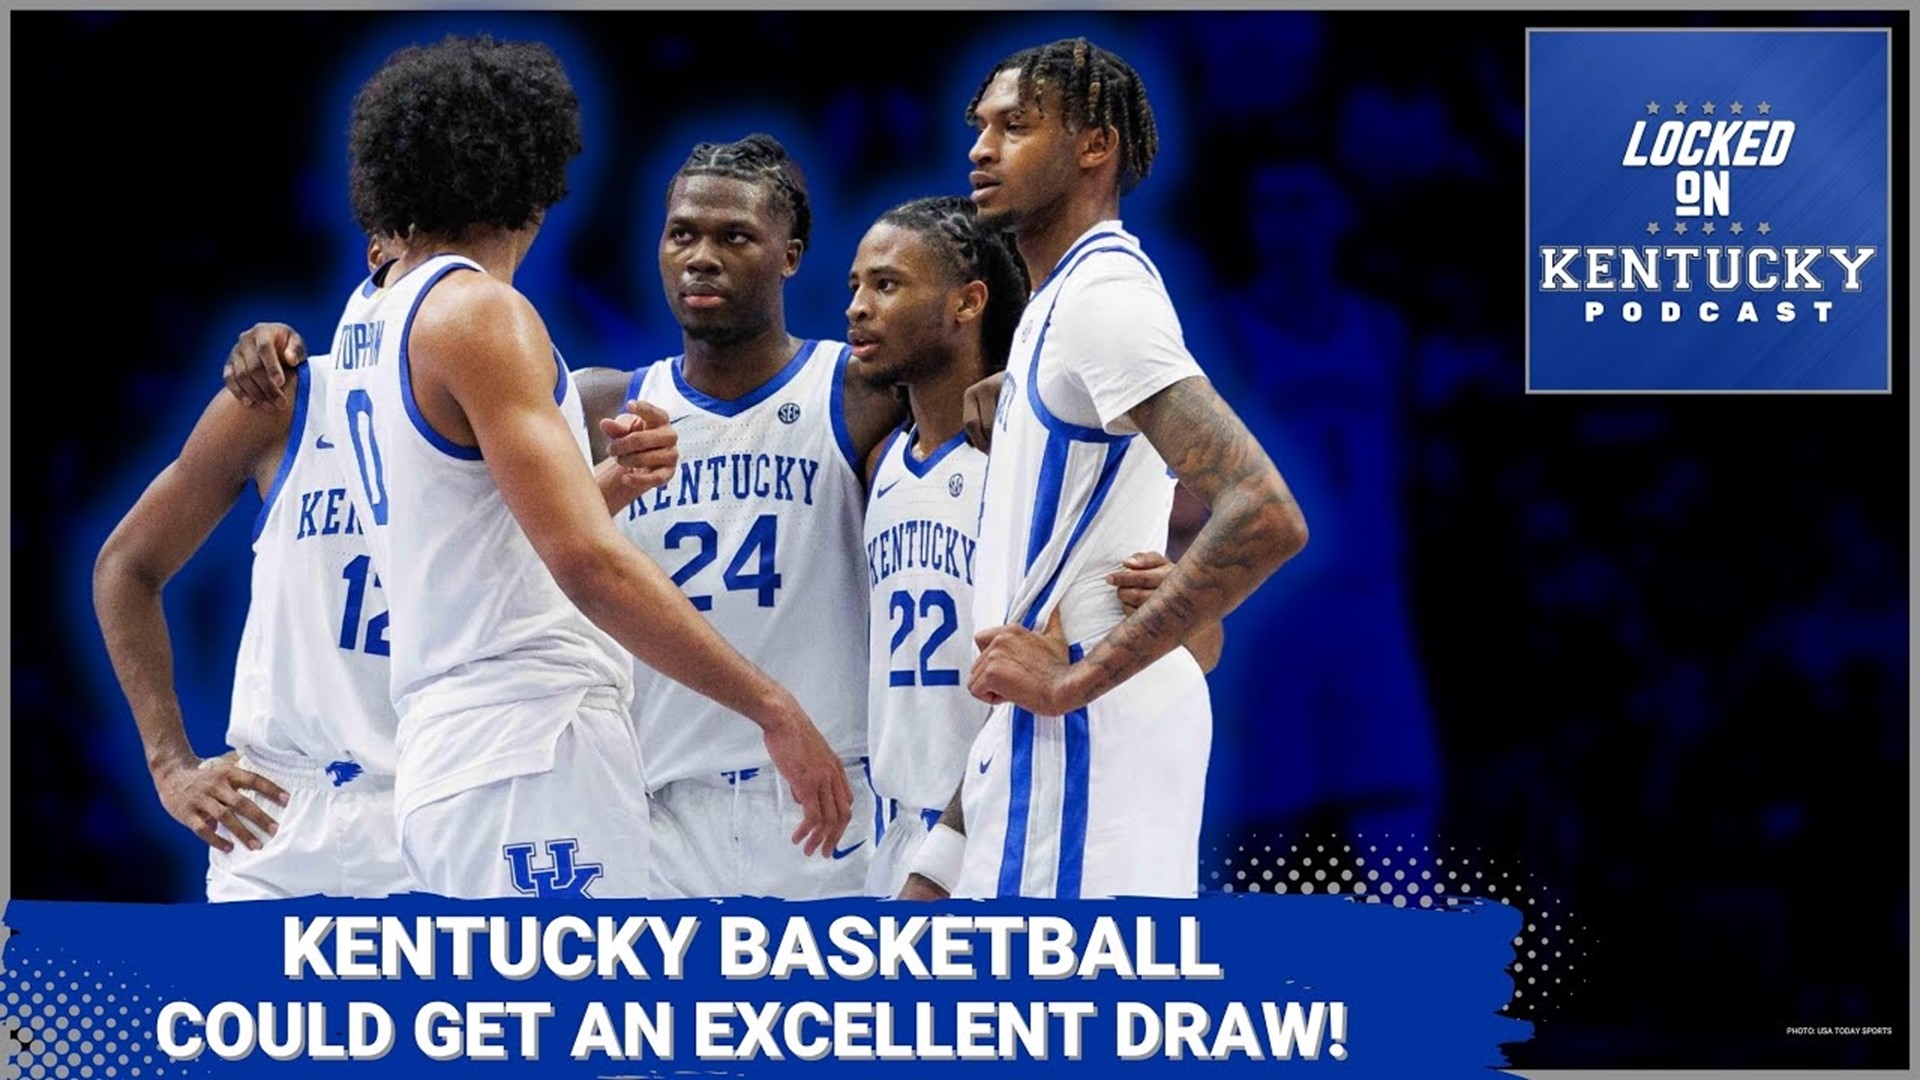 Dawe takes a look one more time at the updated bracketology from ESPN, CBS Sports, and NCAA.com. There are a multitude of interesting draws projected.